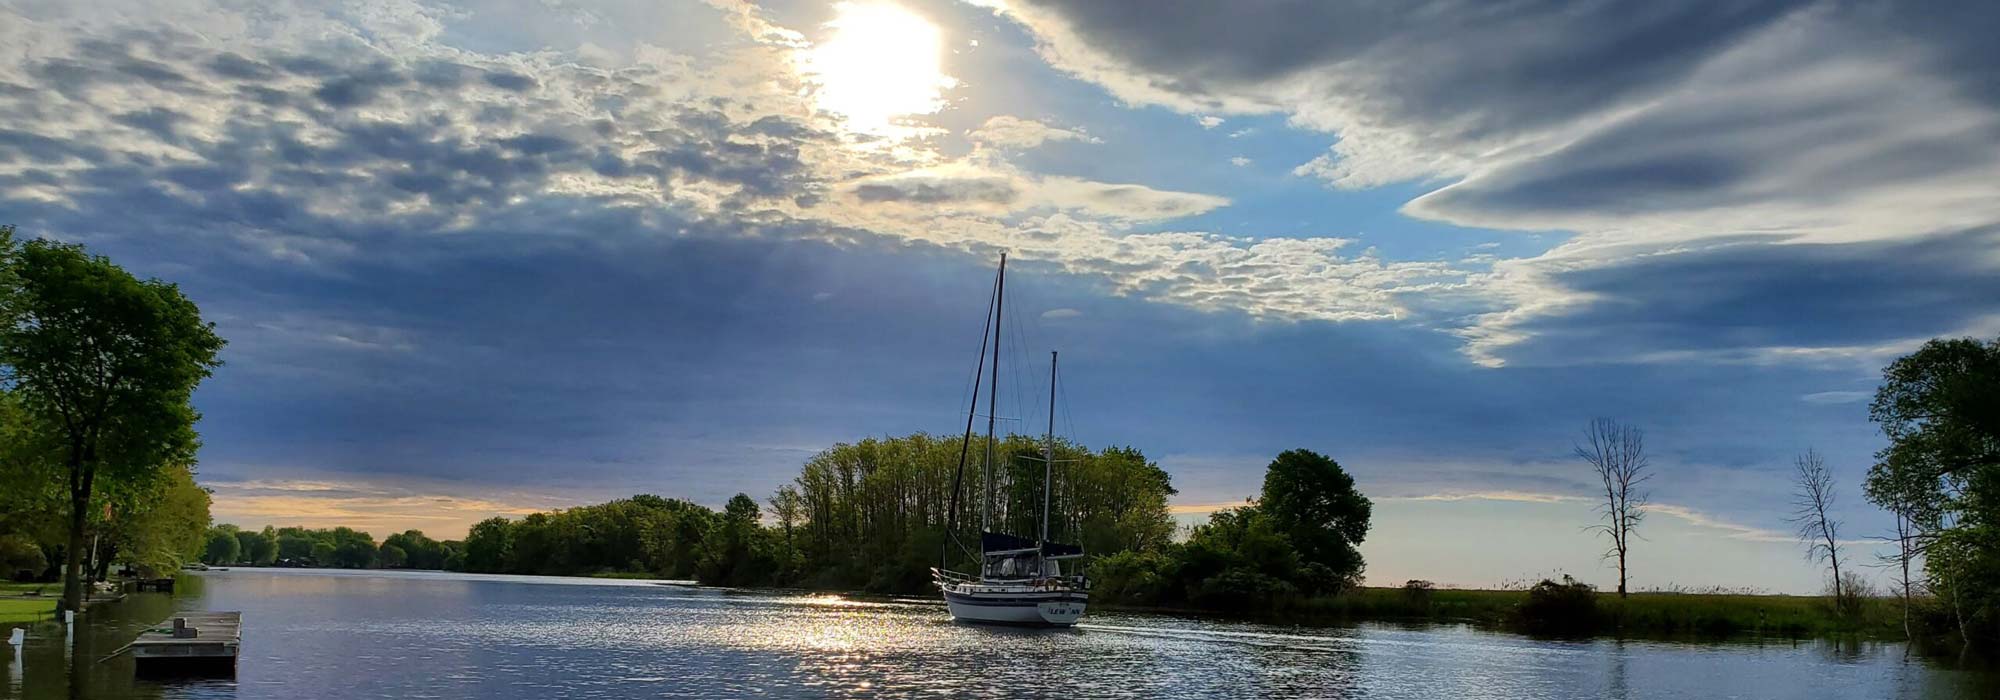 Sailboat on the river